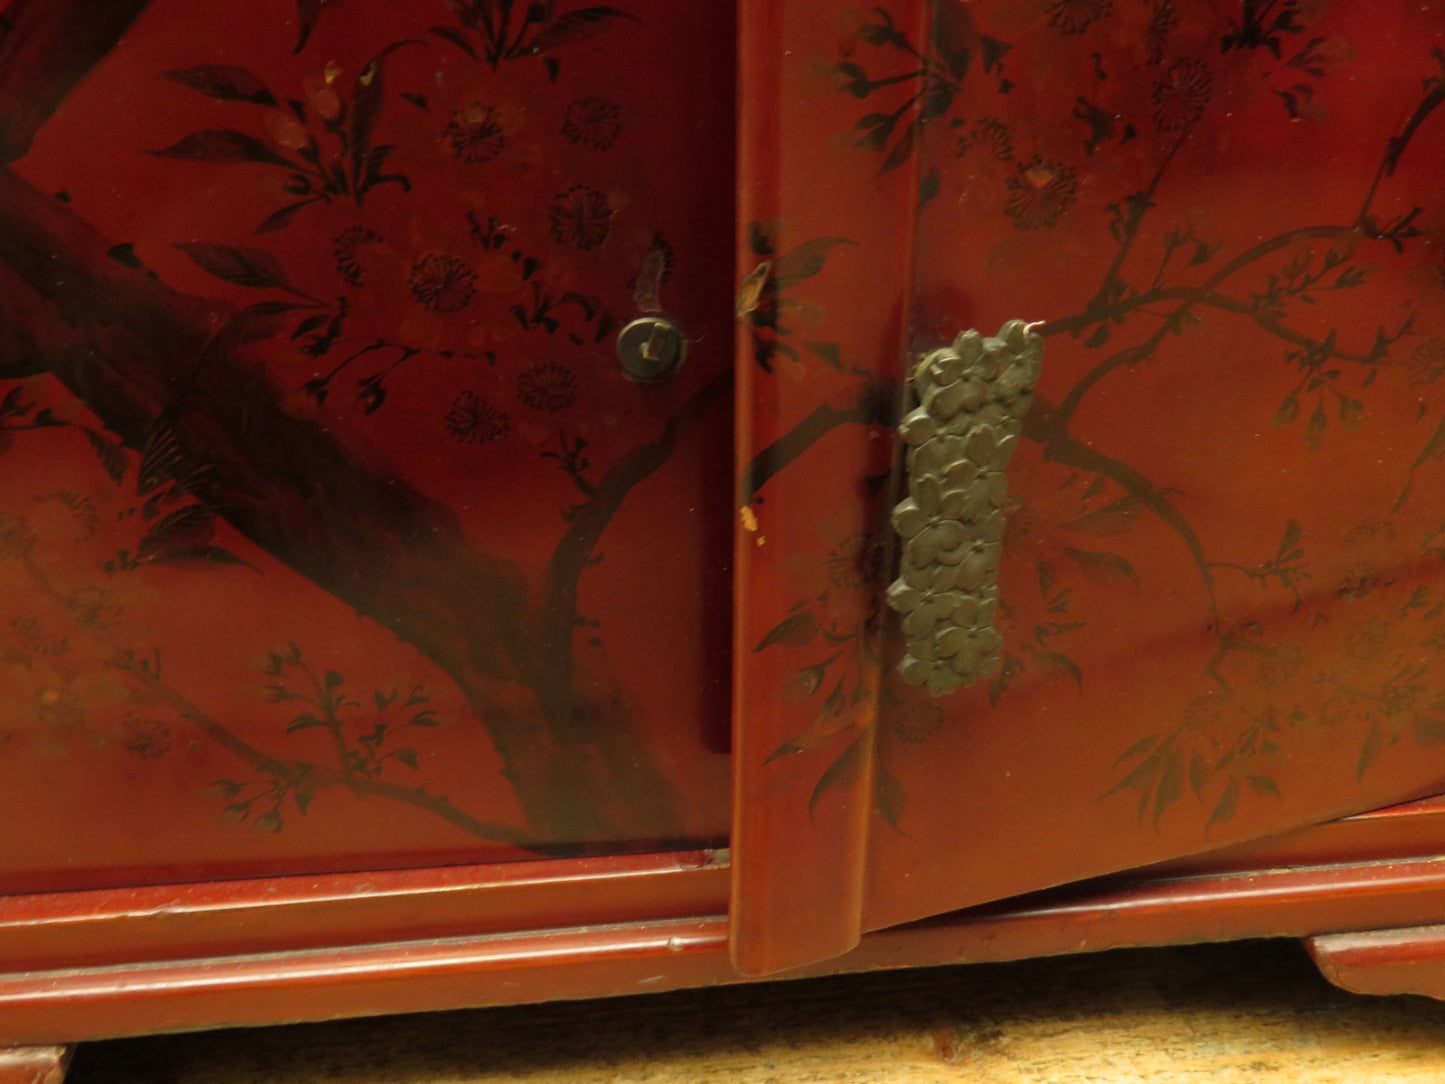 Japanese Red Lacquered Shodana Cabinet with Cherry Blossoms c1880